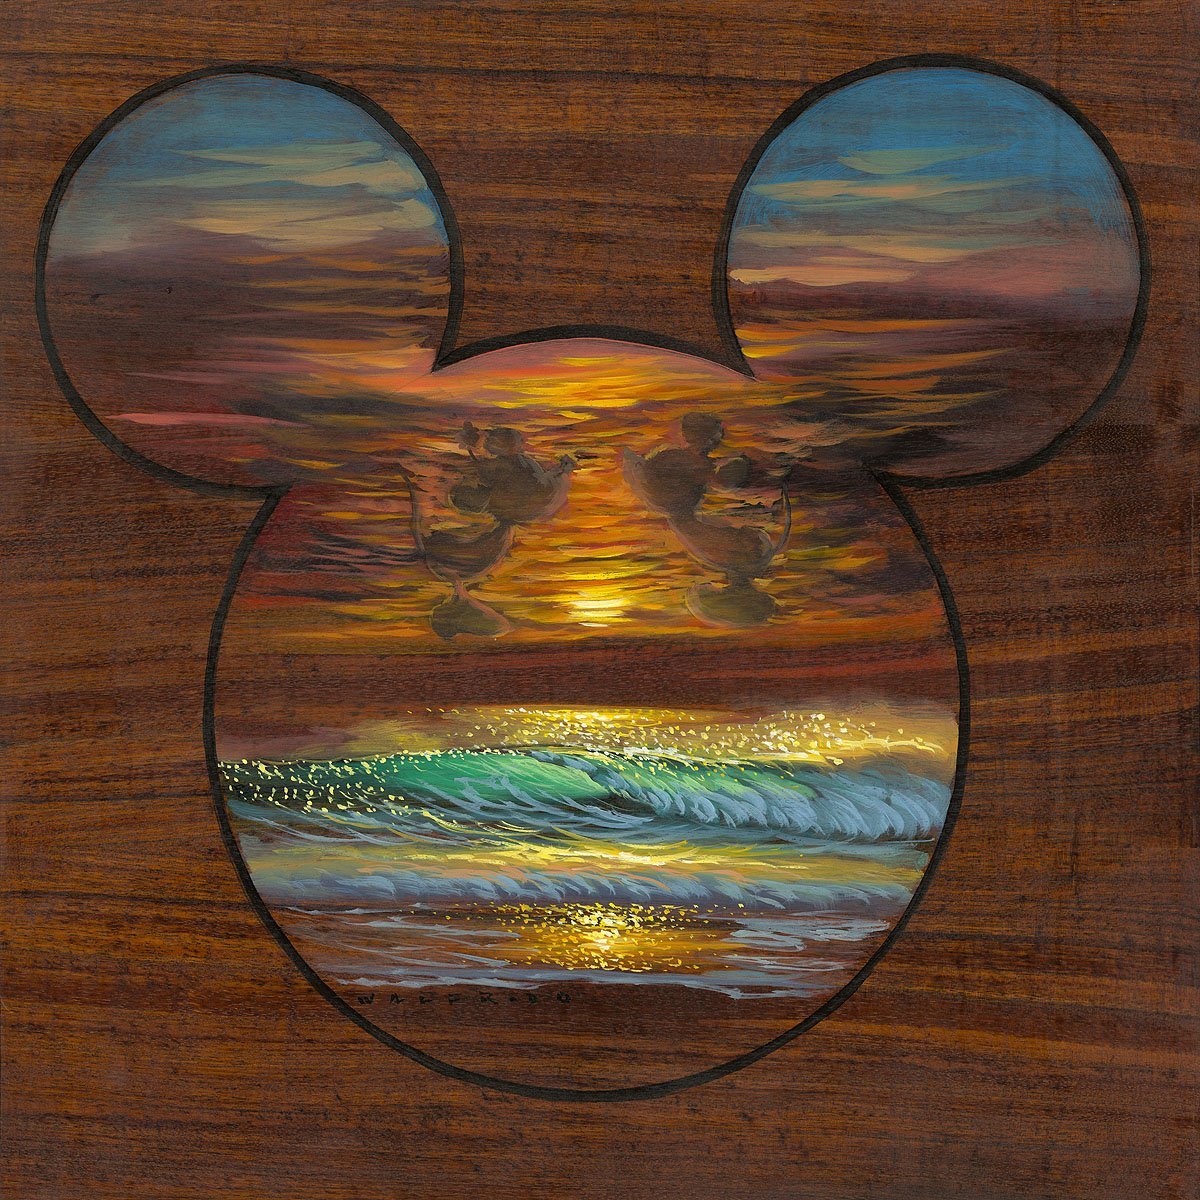 Sunset Sihouette by Walfrido Garcia. Inside Mickey's head outline is a cloud formation of Mickey and Minnie silhouette close to kissing each other over a beautiful ocean sunset.